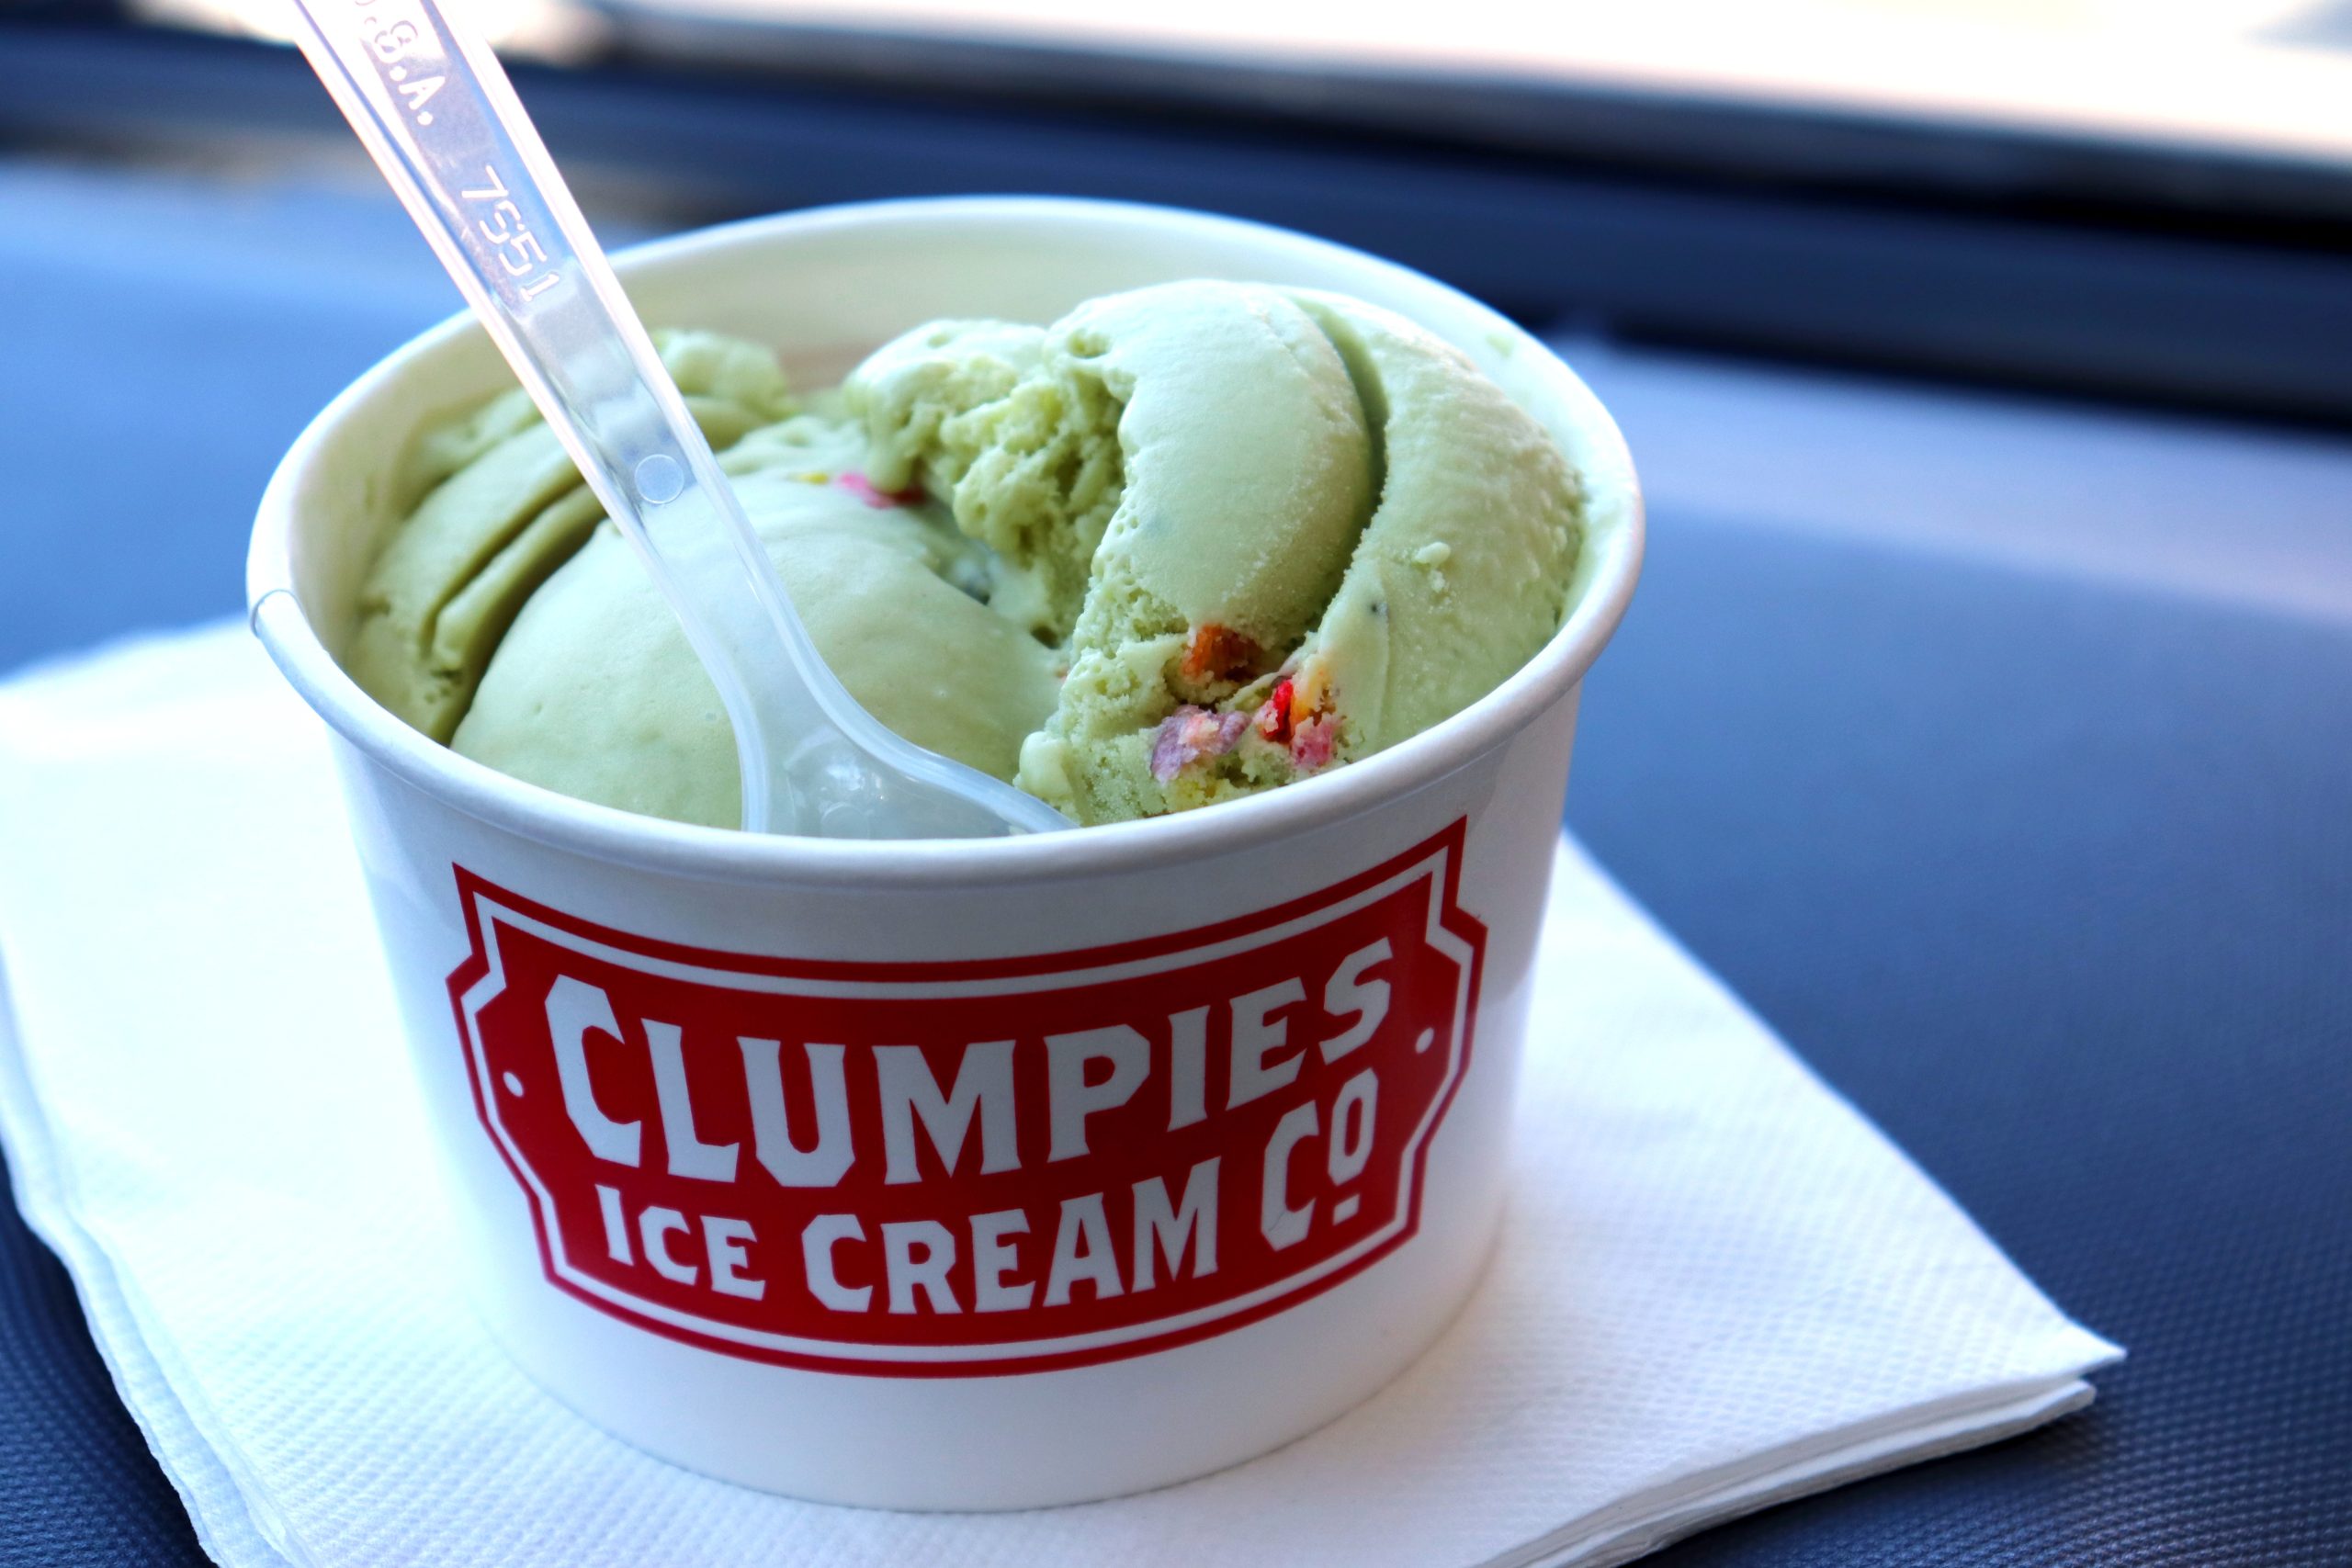 Clumpies: A Chattanooga Ice Cream Favorite